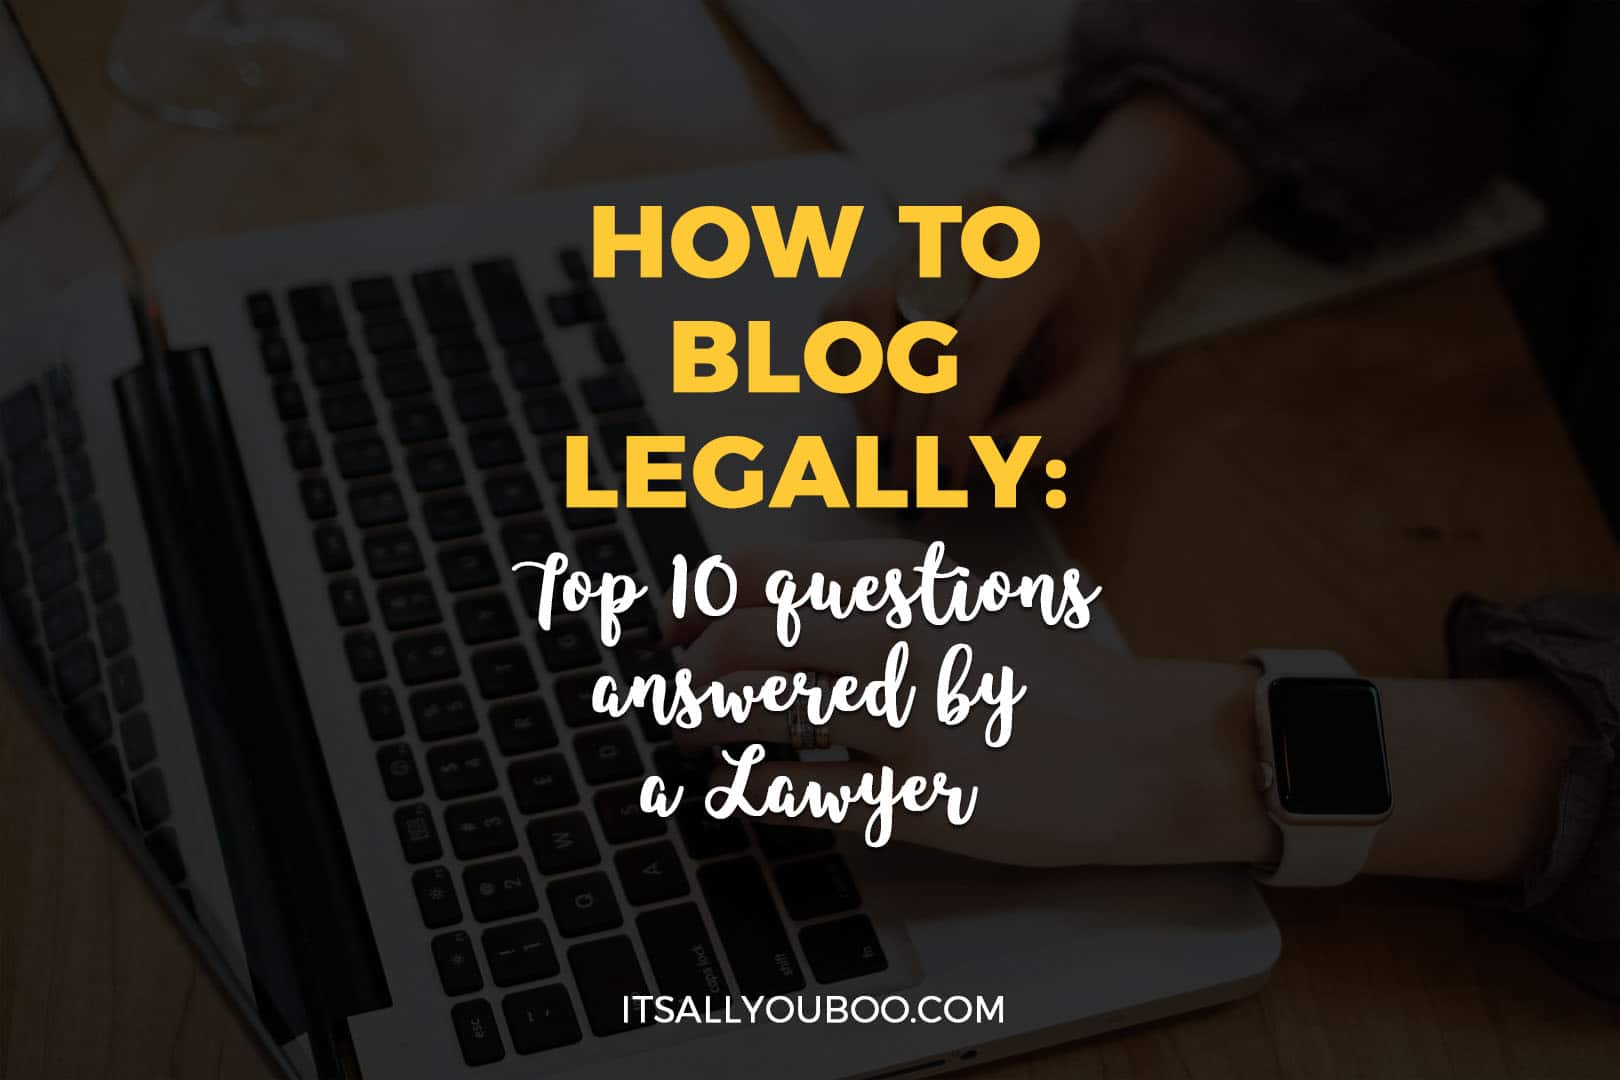 How to Blog Legally: Top 10 Questions answered by a Lawyer